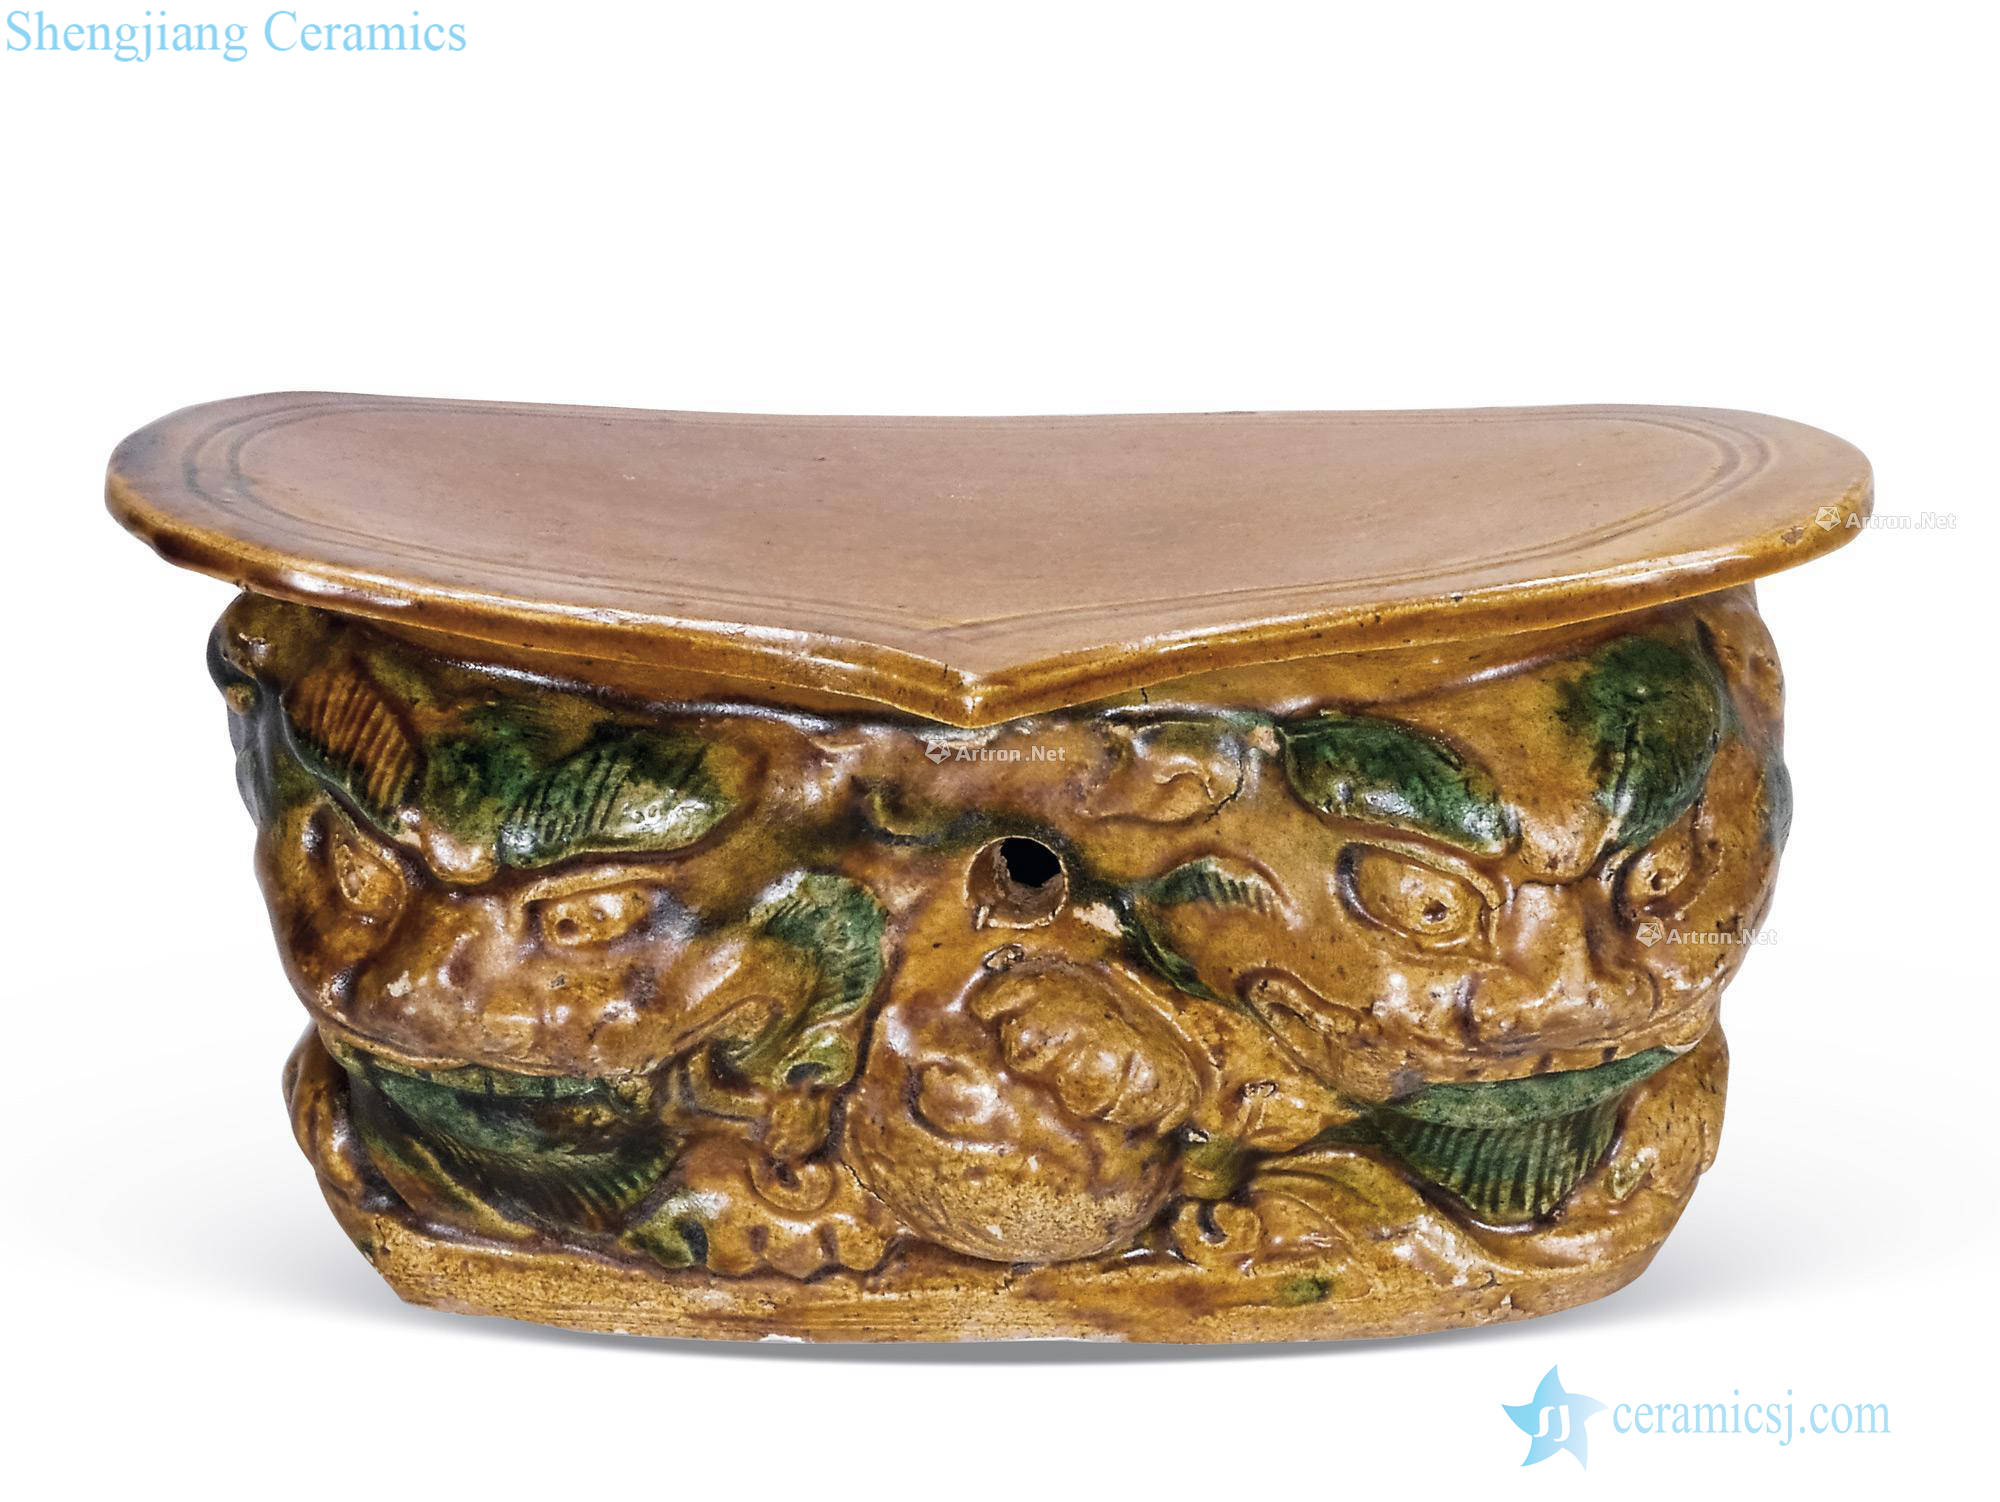 The song dynasty Three-color tiger pillow